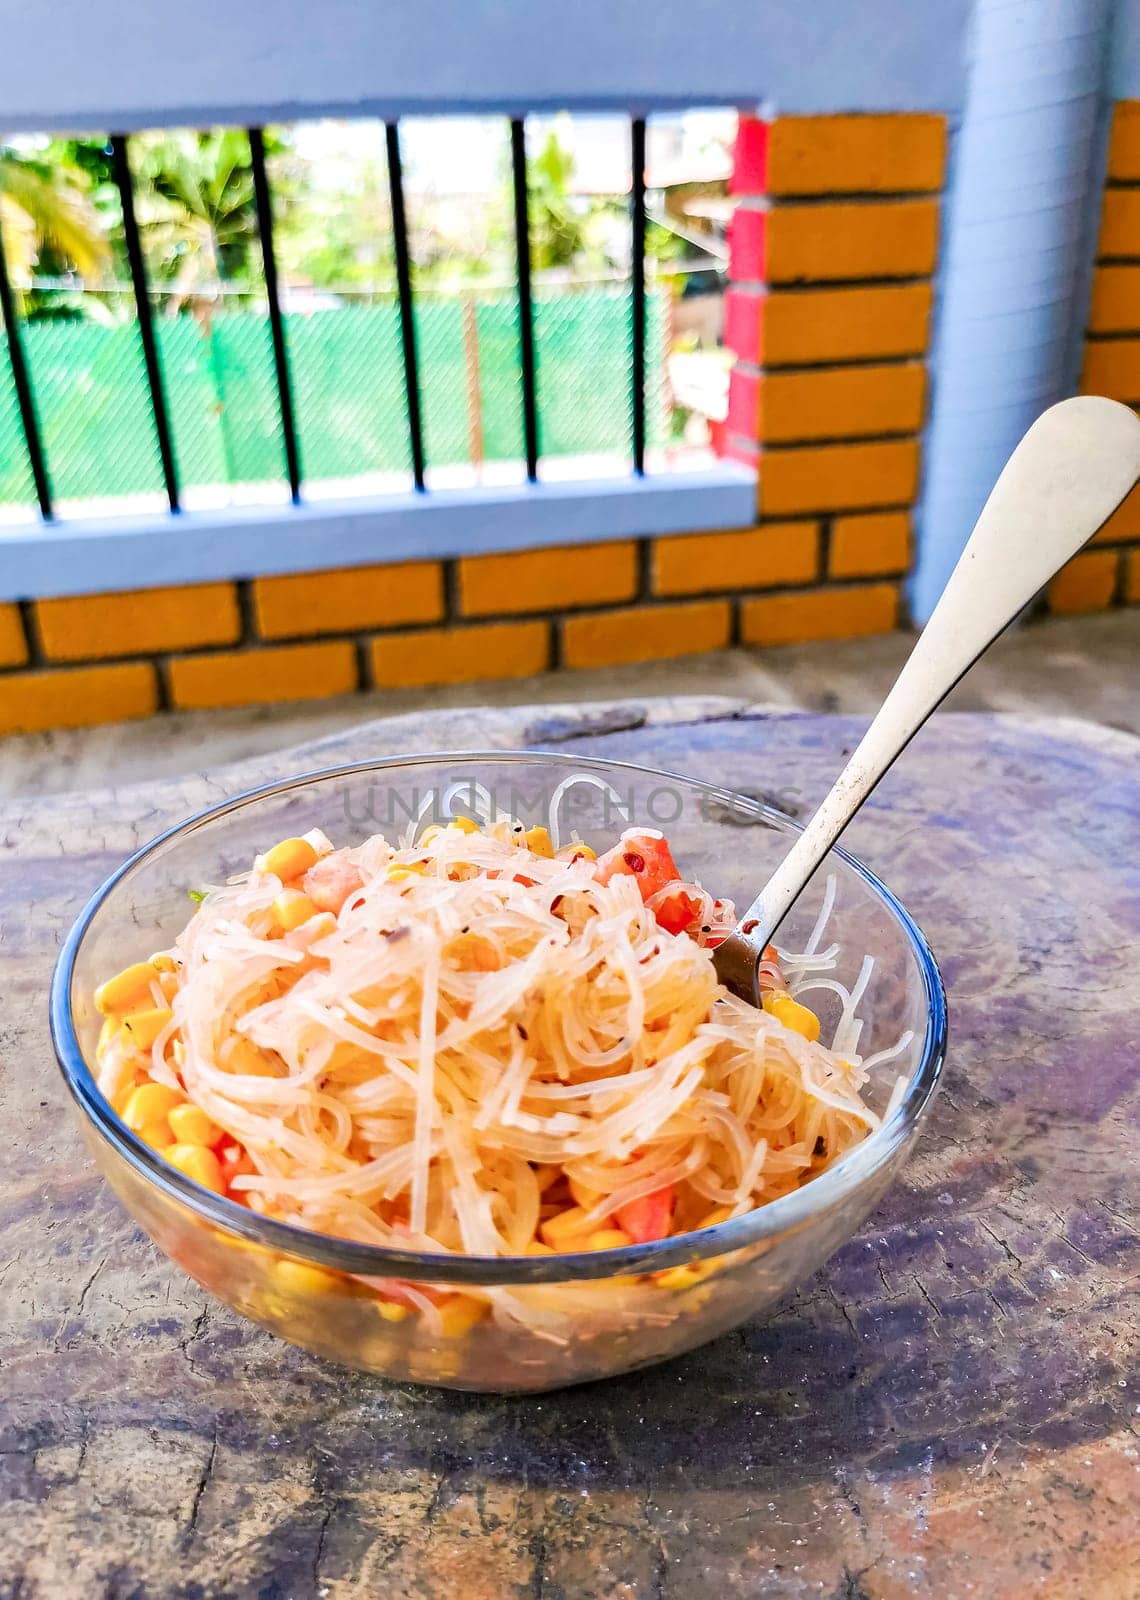 Dish of glass noodles with corn onions and tomatoes in Zicatela Puerto Escondido Oaxaca Mexico.